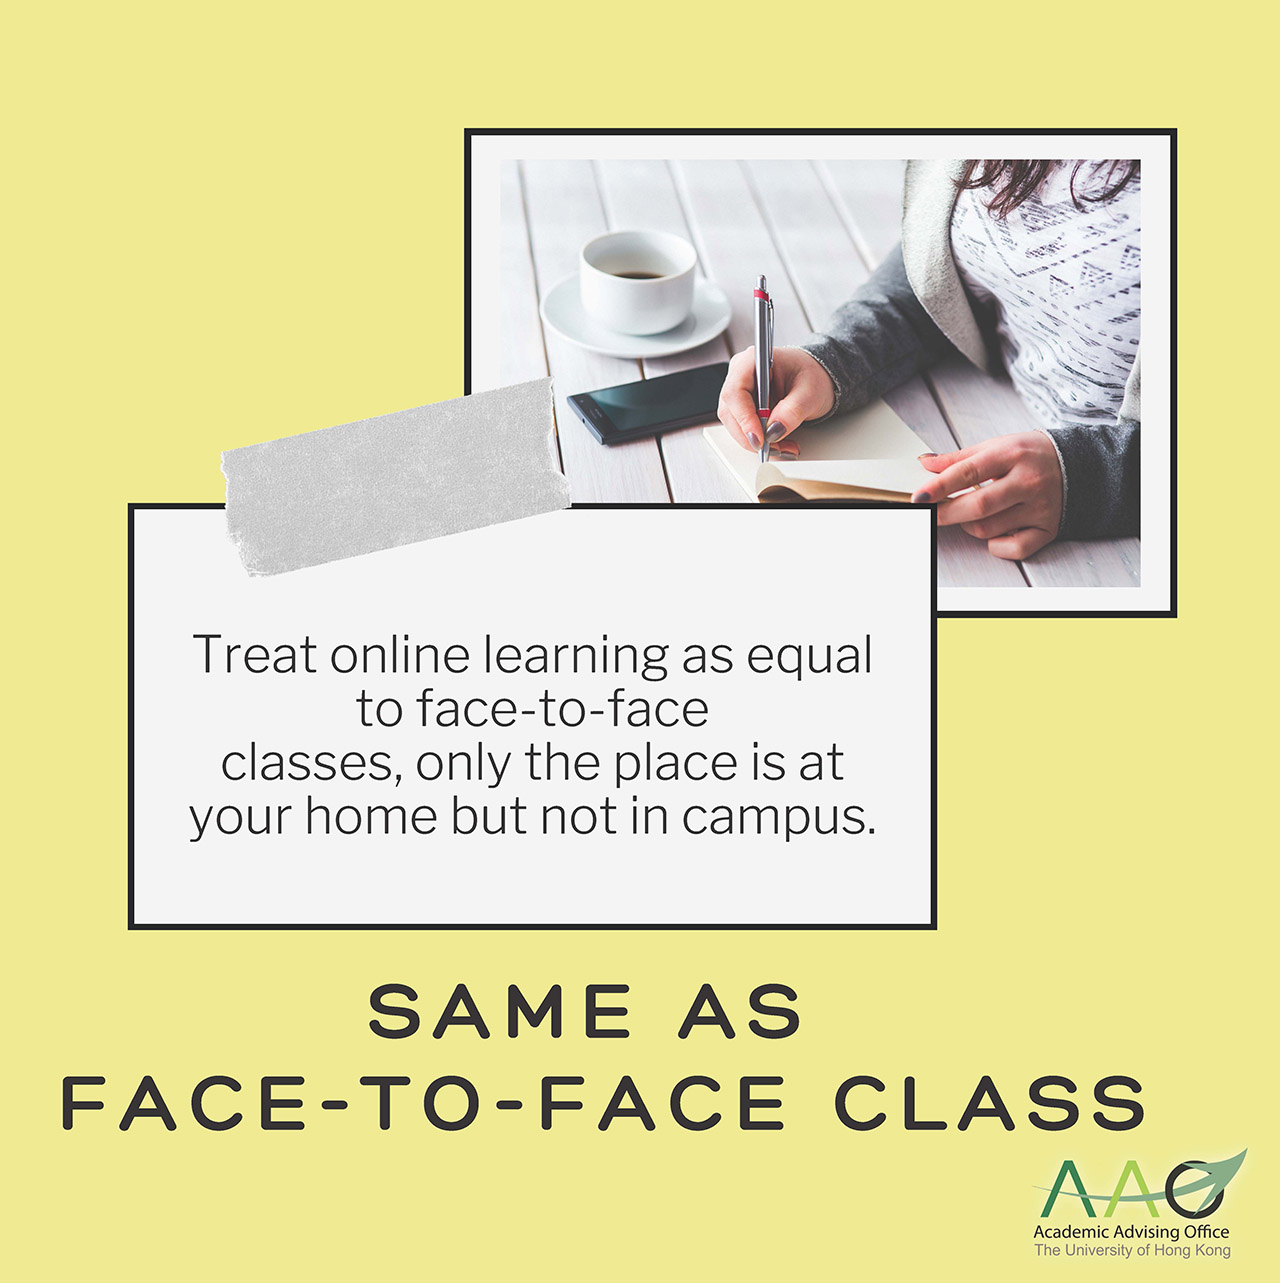 Same as Face to Face Class: Treat online learning as equal to face-to-face classes, only the place is at your home but not in campus